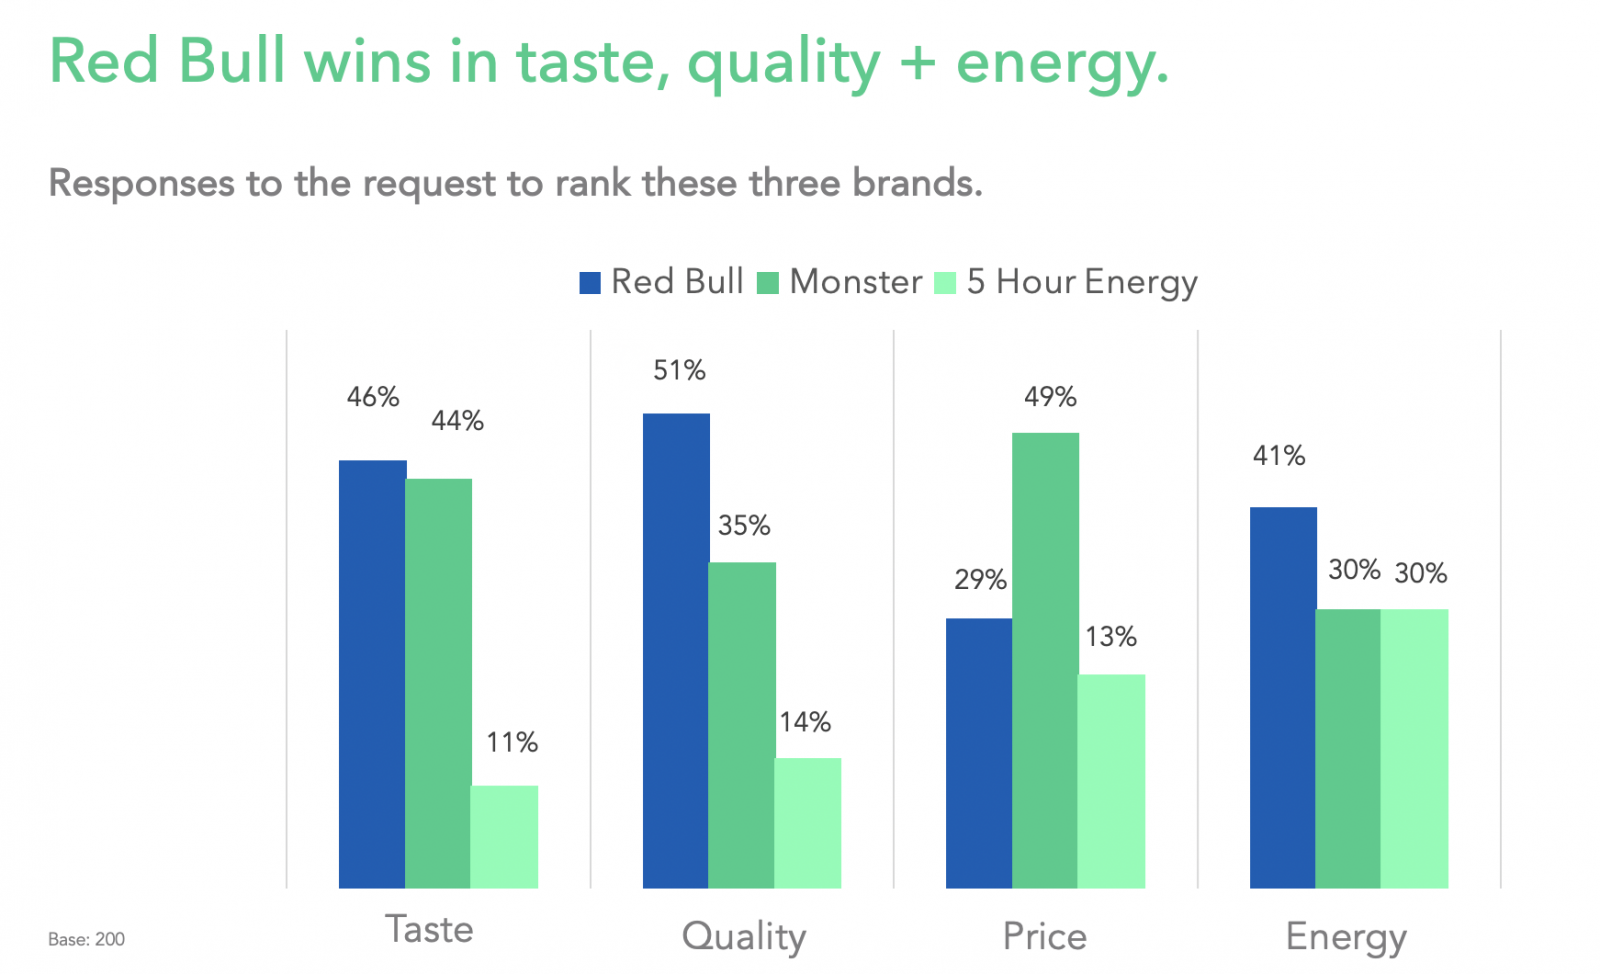 Red Bull wins in taste, quality + energy. Only loses in price.